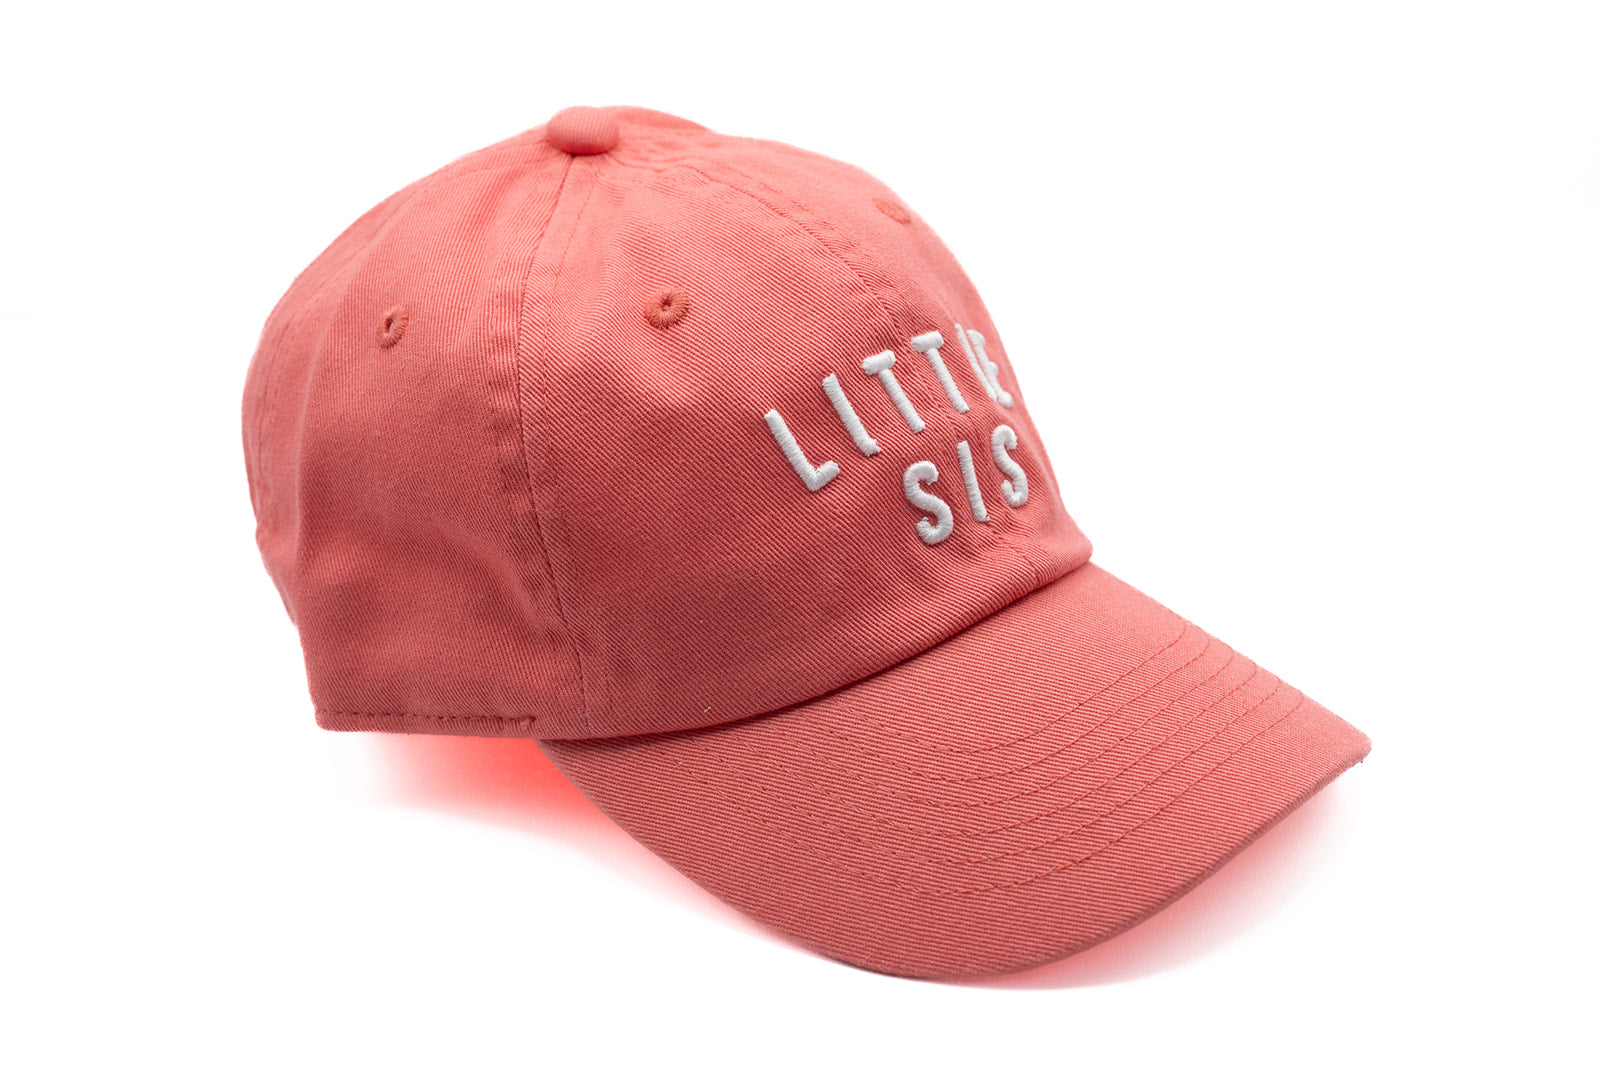 Coral Crush Little Sis Hat